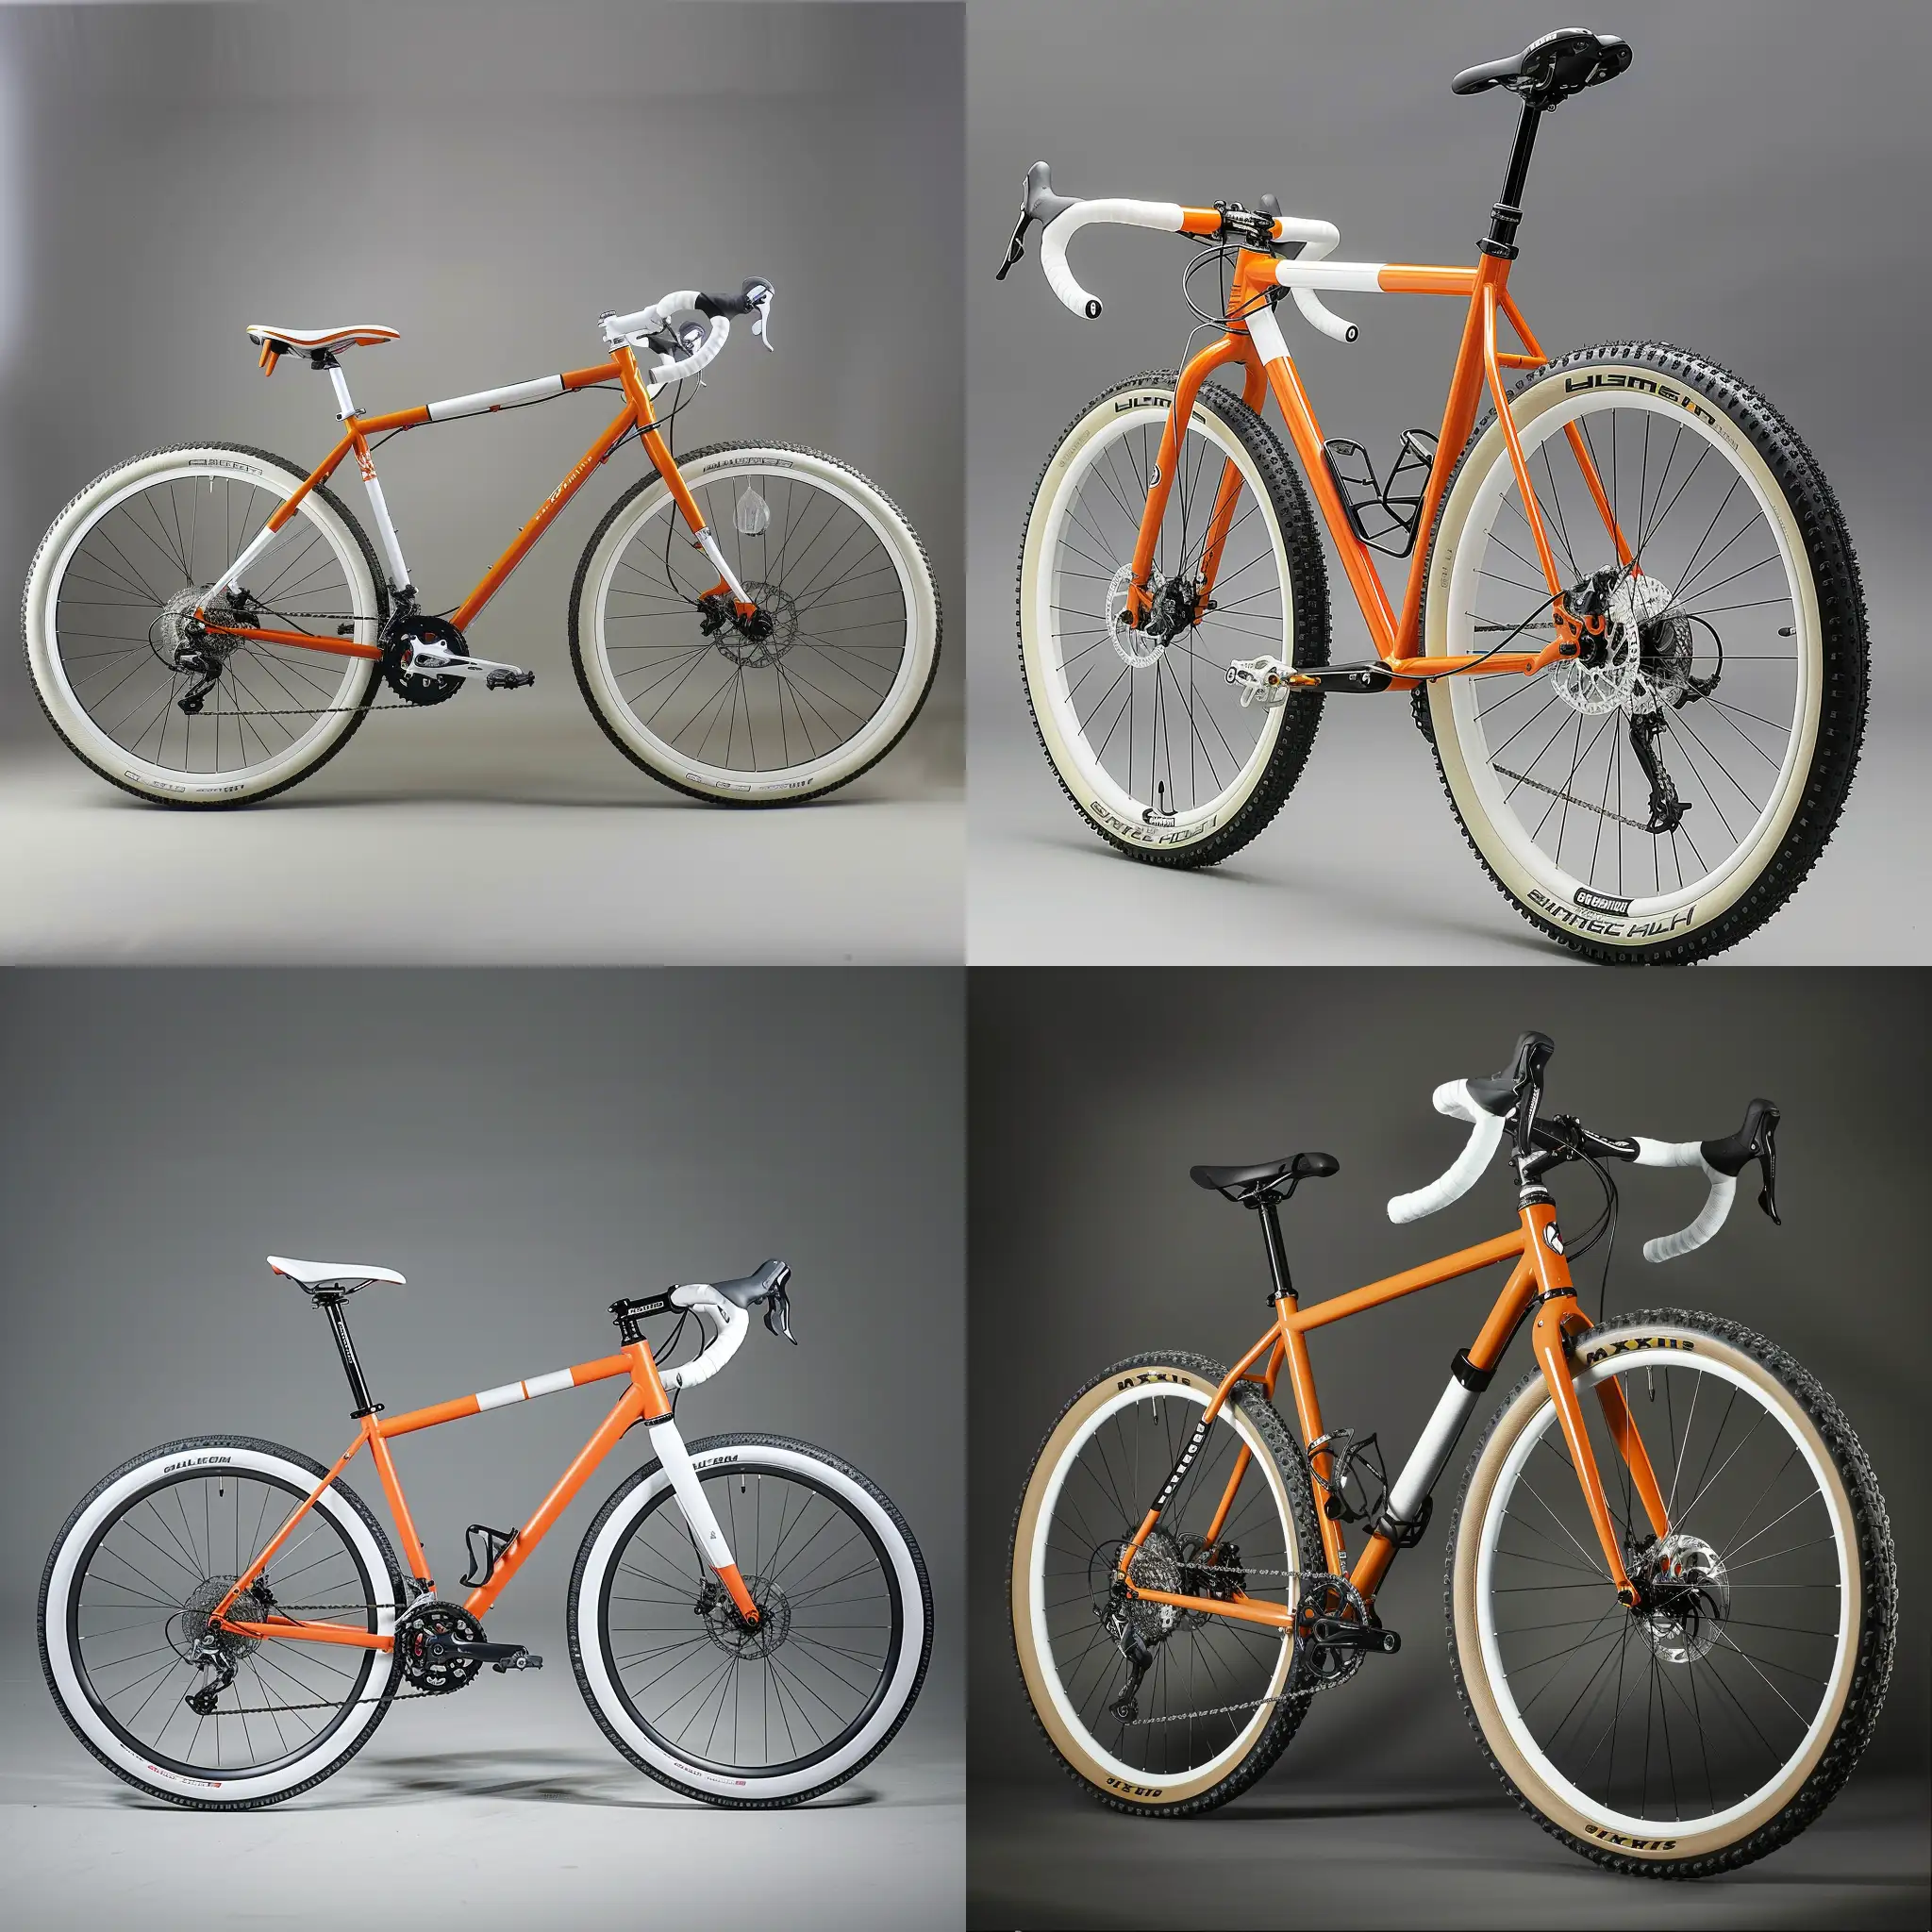 Professional studio product photography, adventure bicycle, livery in orange and white, white tires